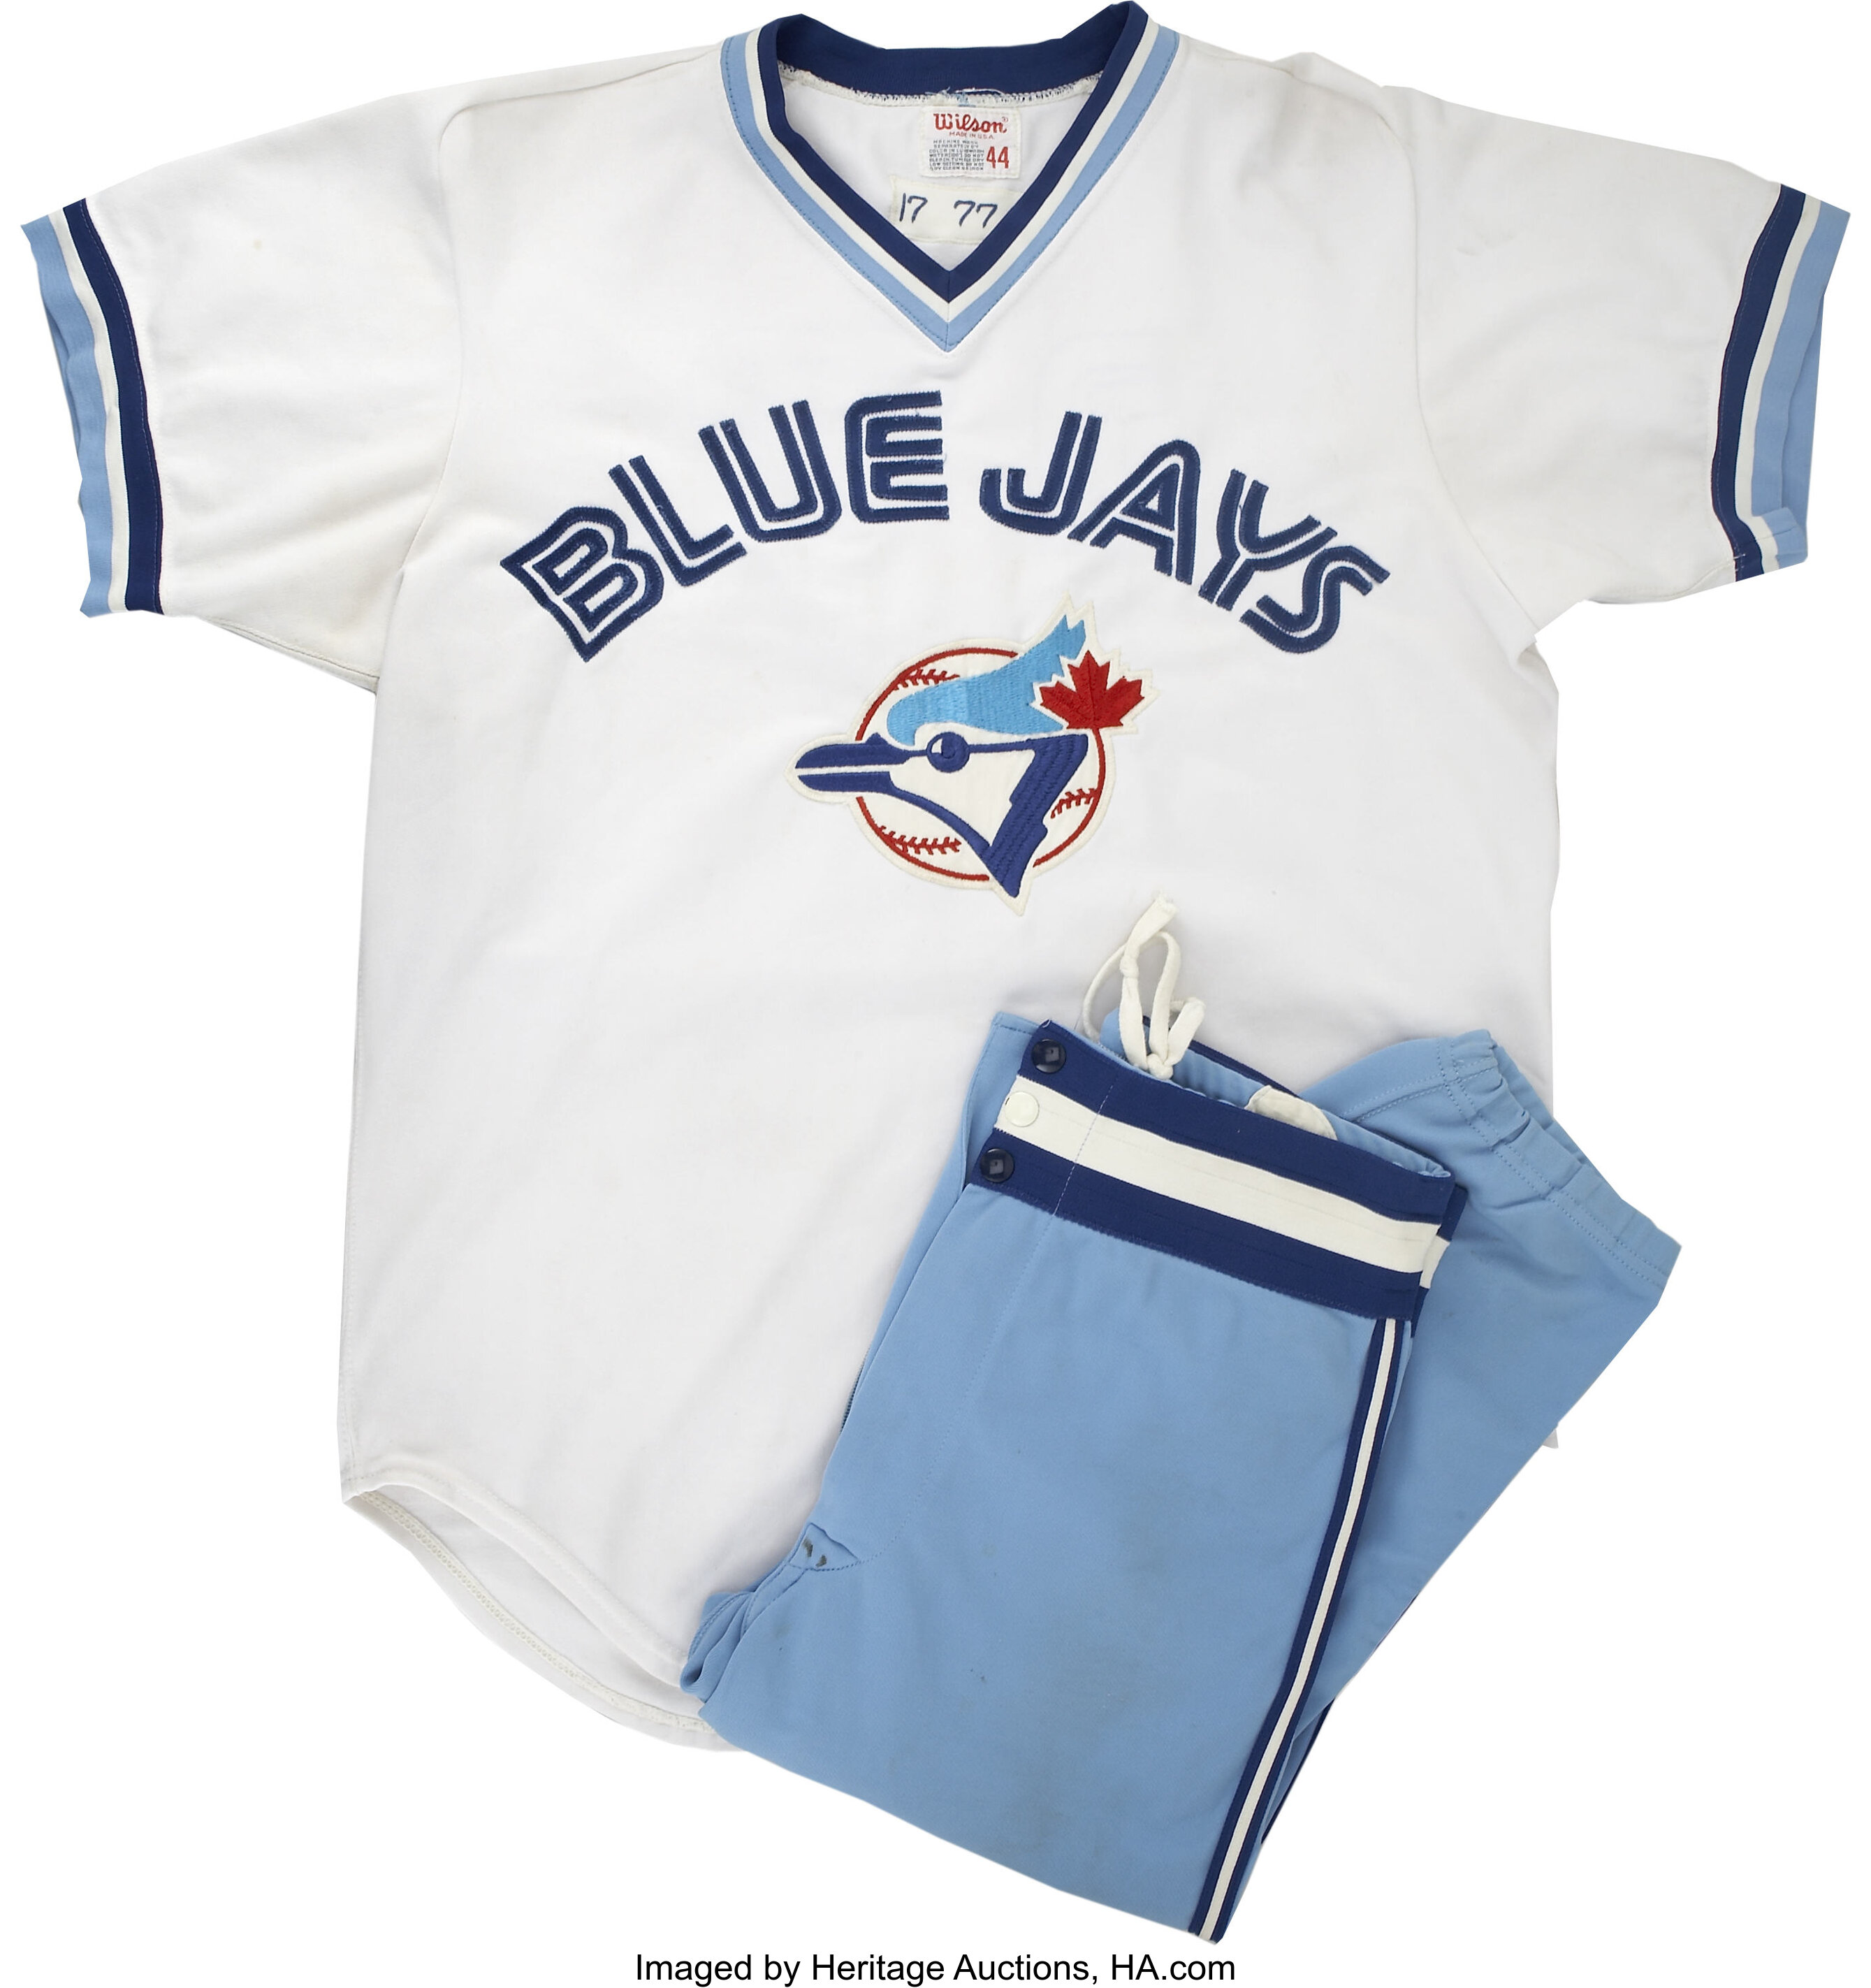 Bid now on game-used jerseys from your - Toronto Blue Jays